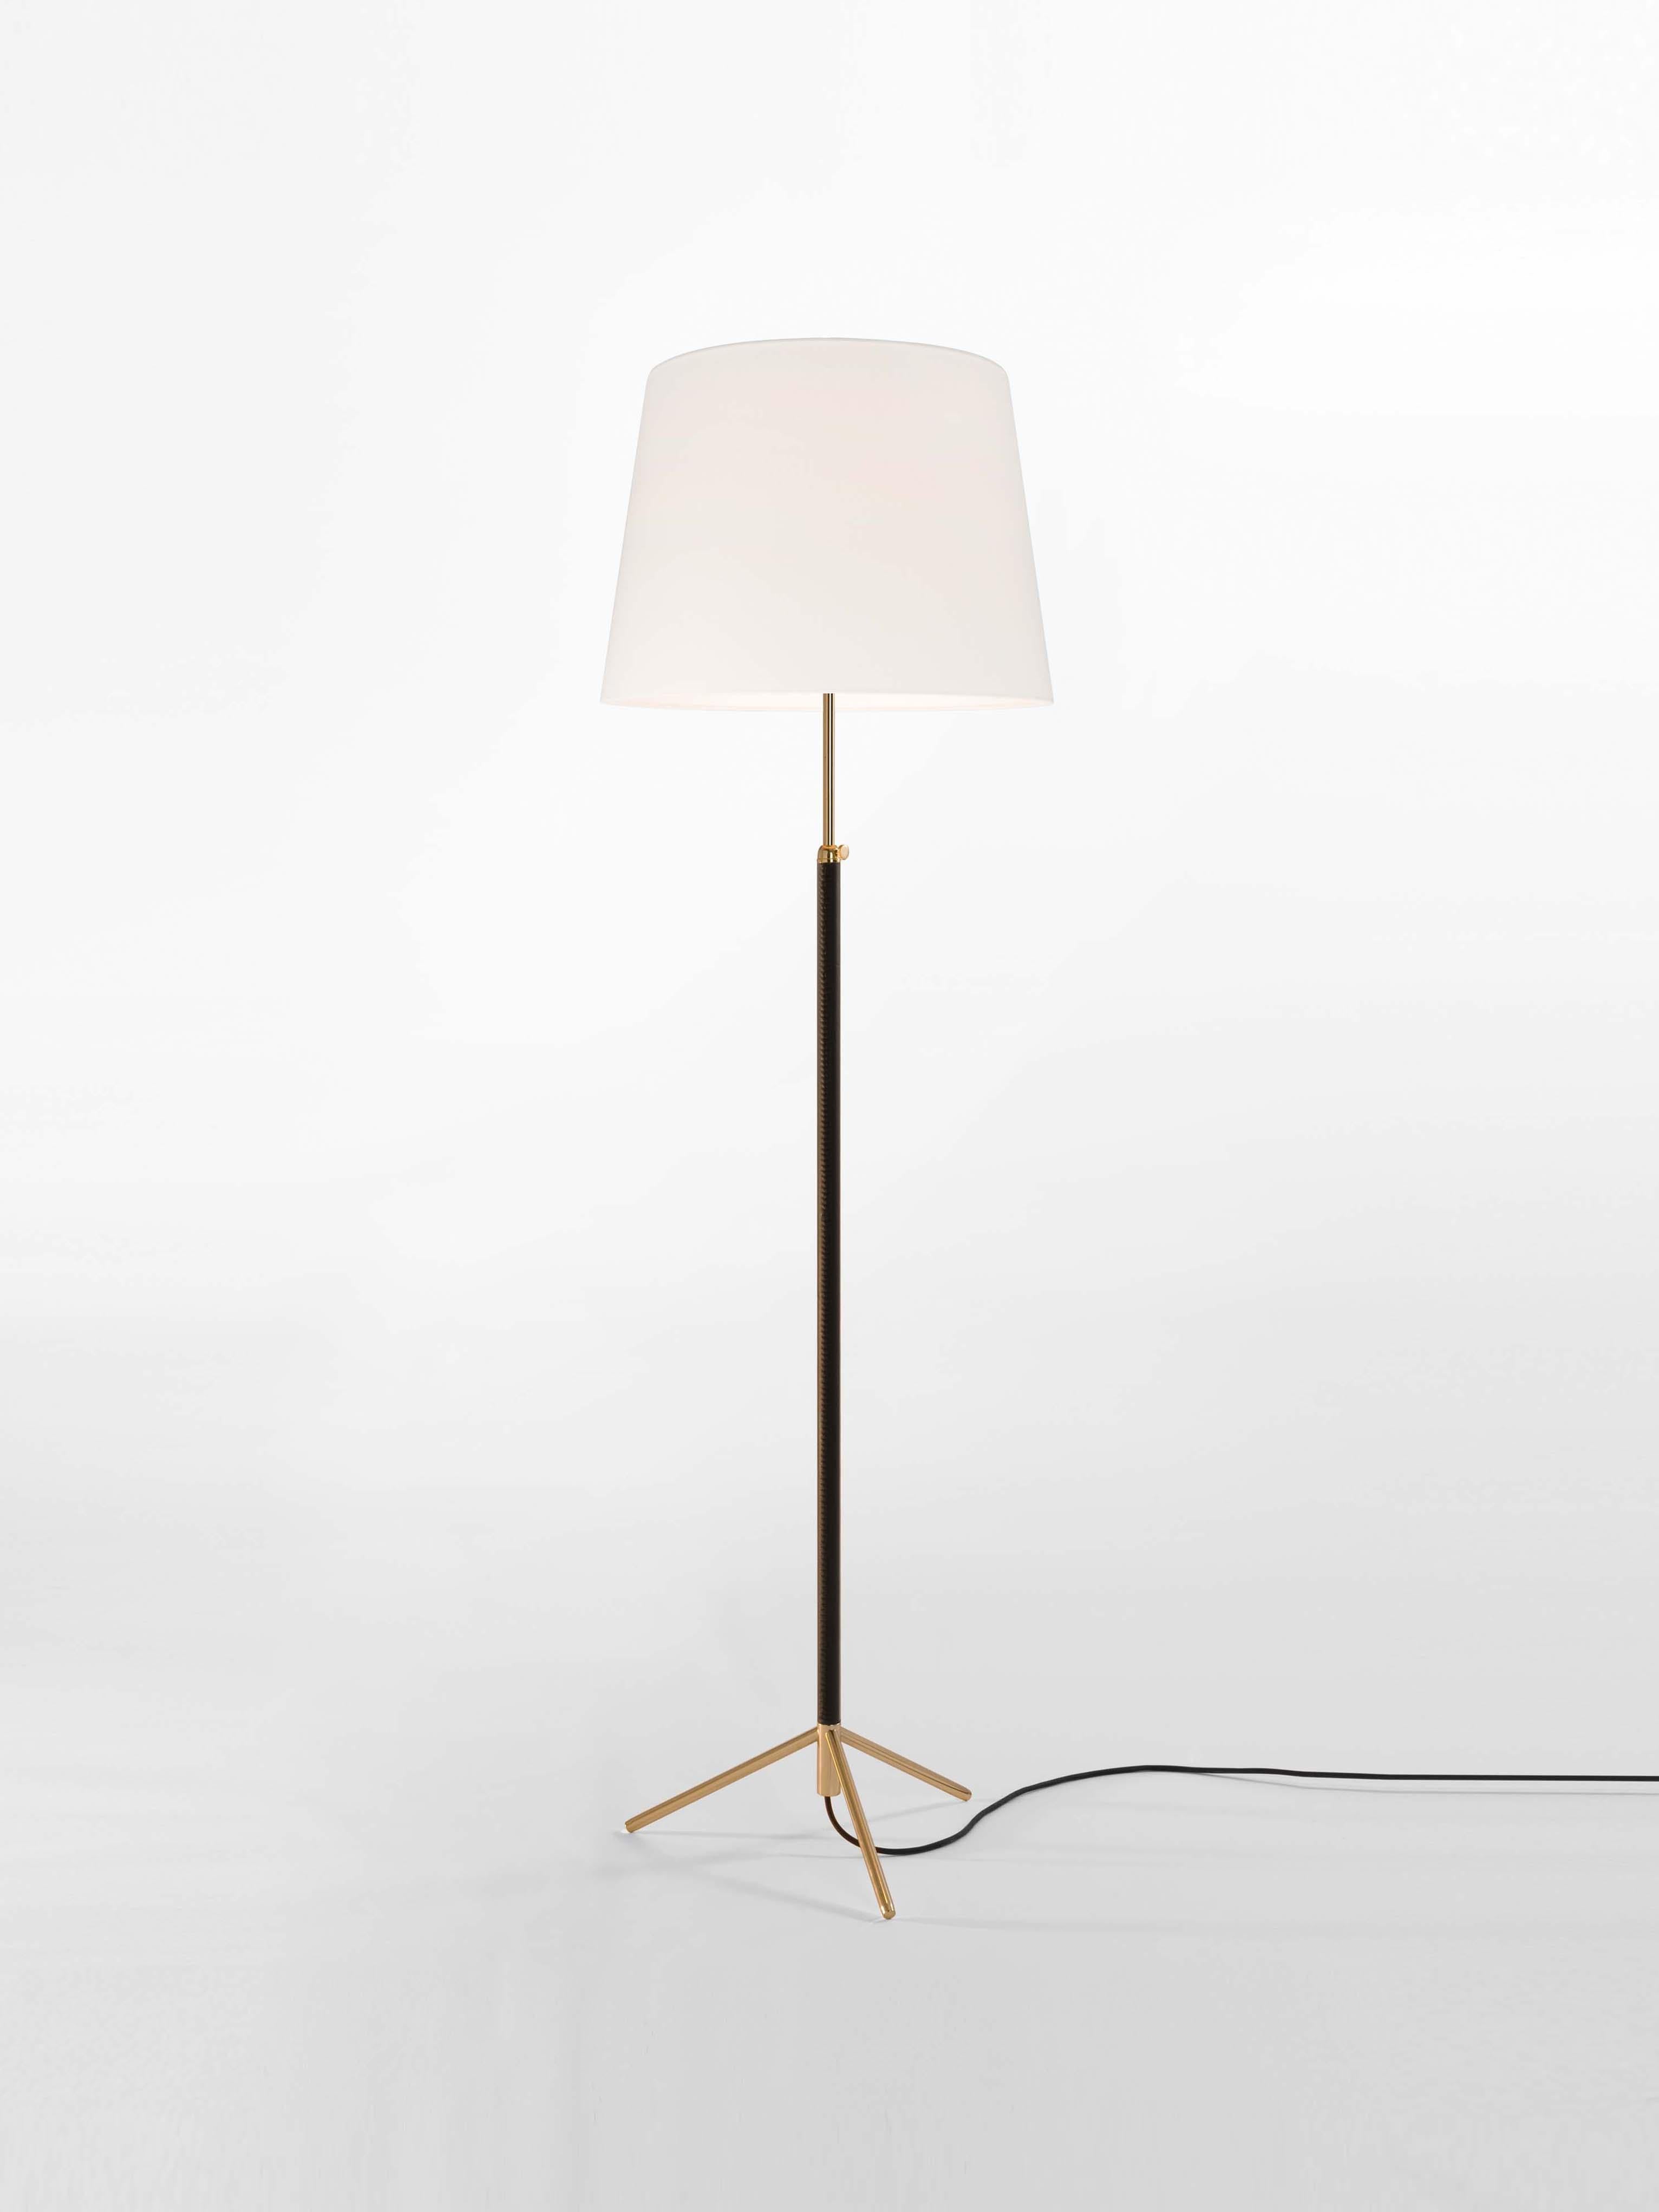 White and brass Pie de Salón G1 floor lamp by Jaume Sans
Dimensions: d 45 x h 120-160 cm
Materials: Metal, leather, linen.
Available in chrome-plated or polished brass structure.
Available in other shade colors and sizes.

This slender